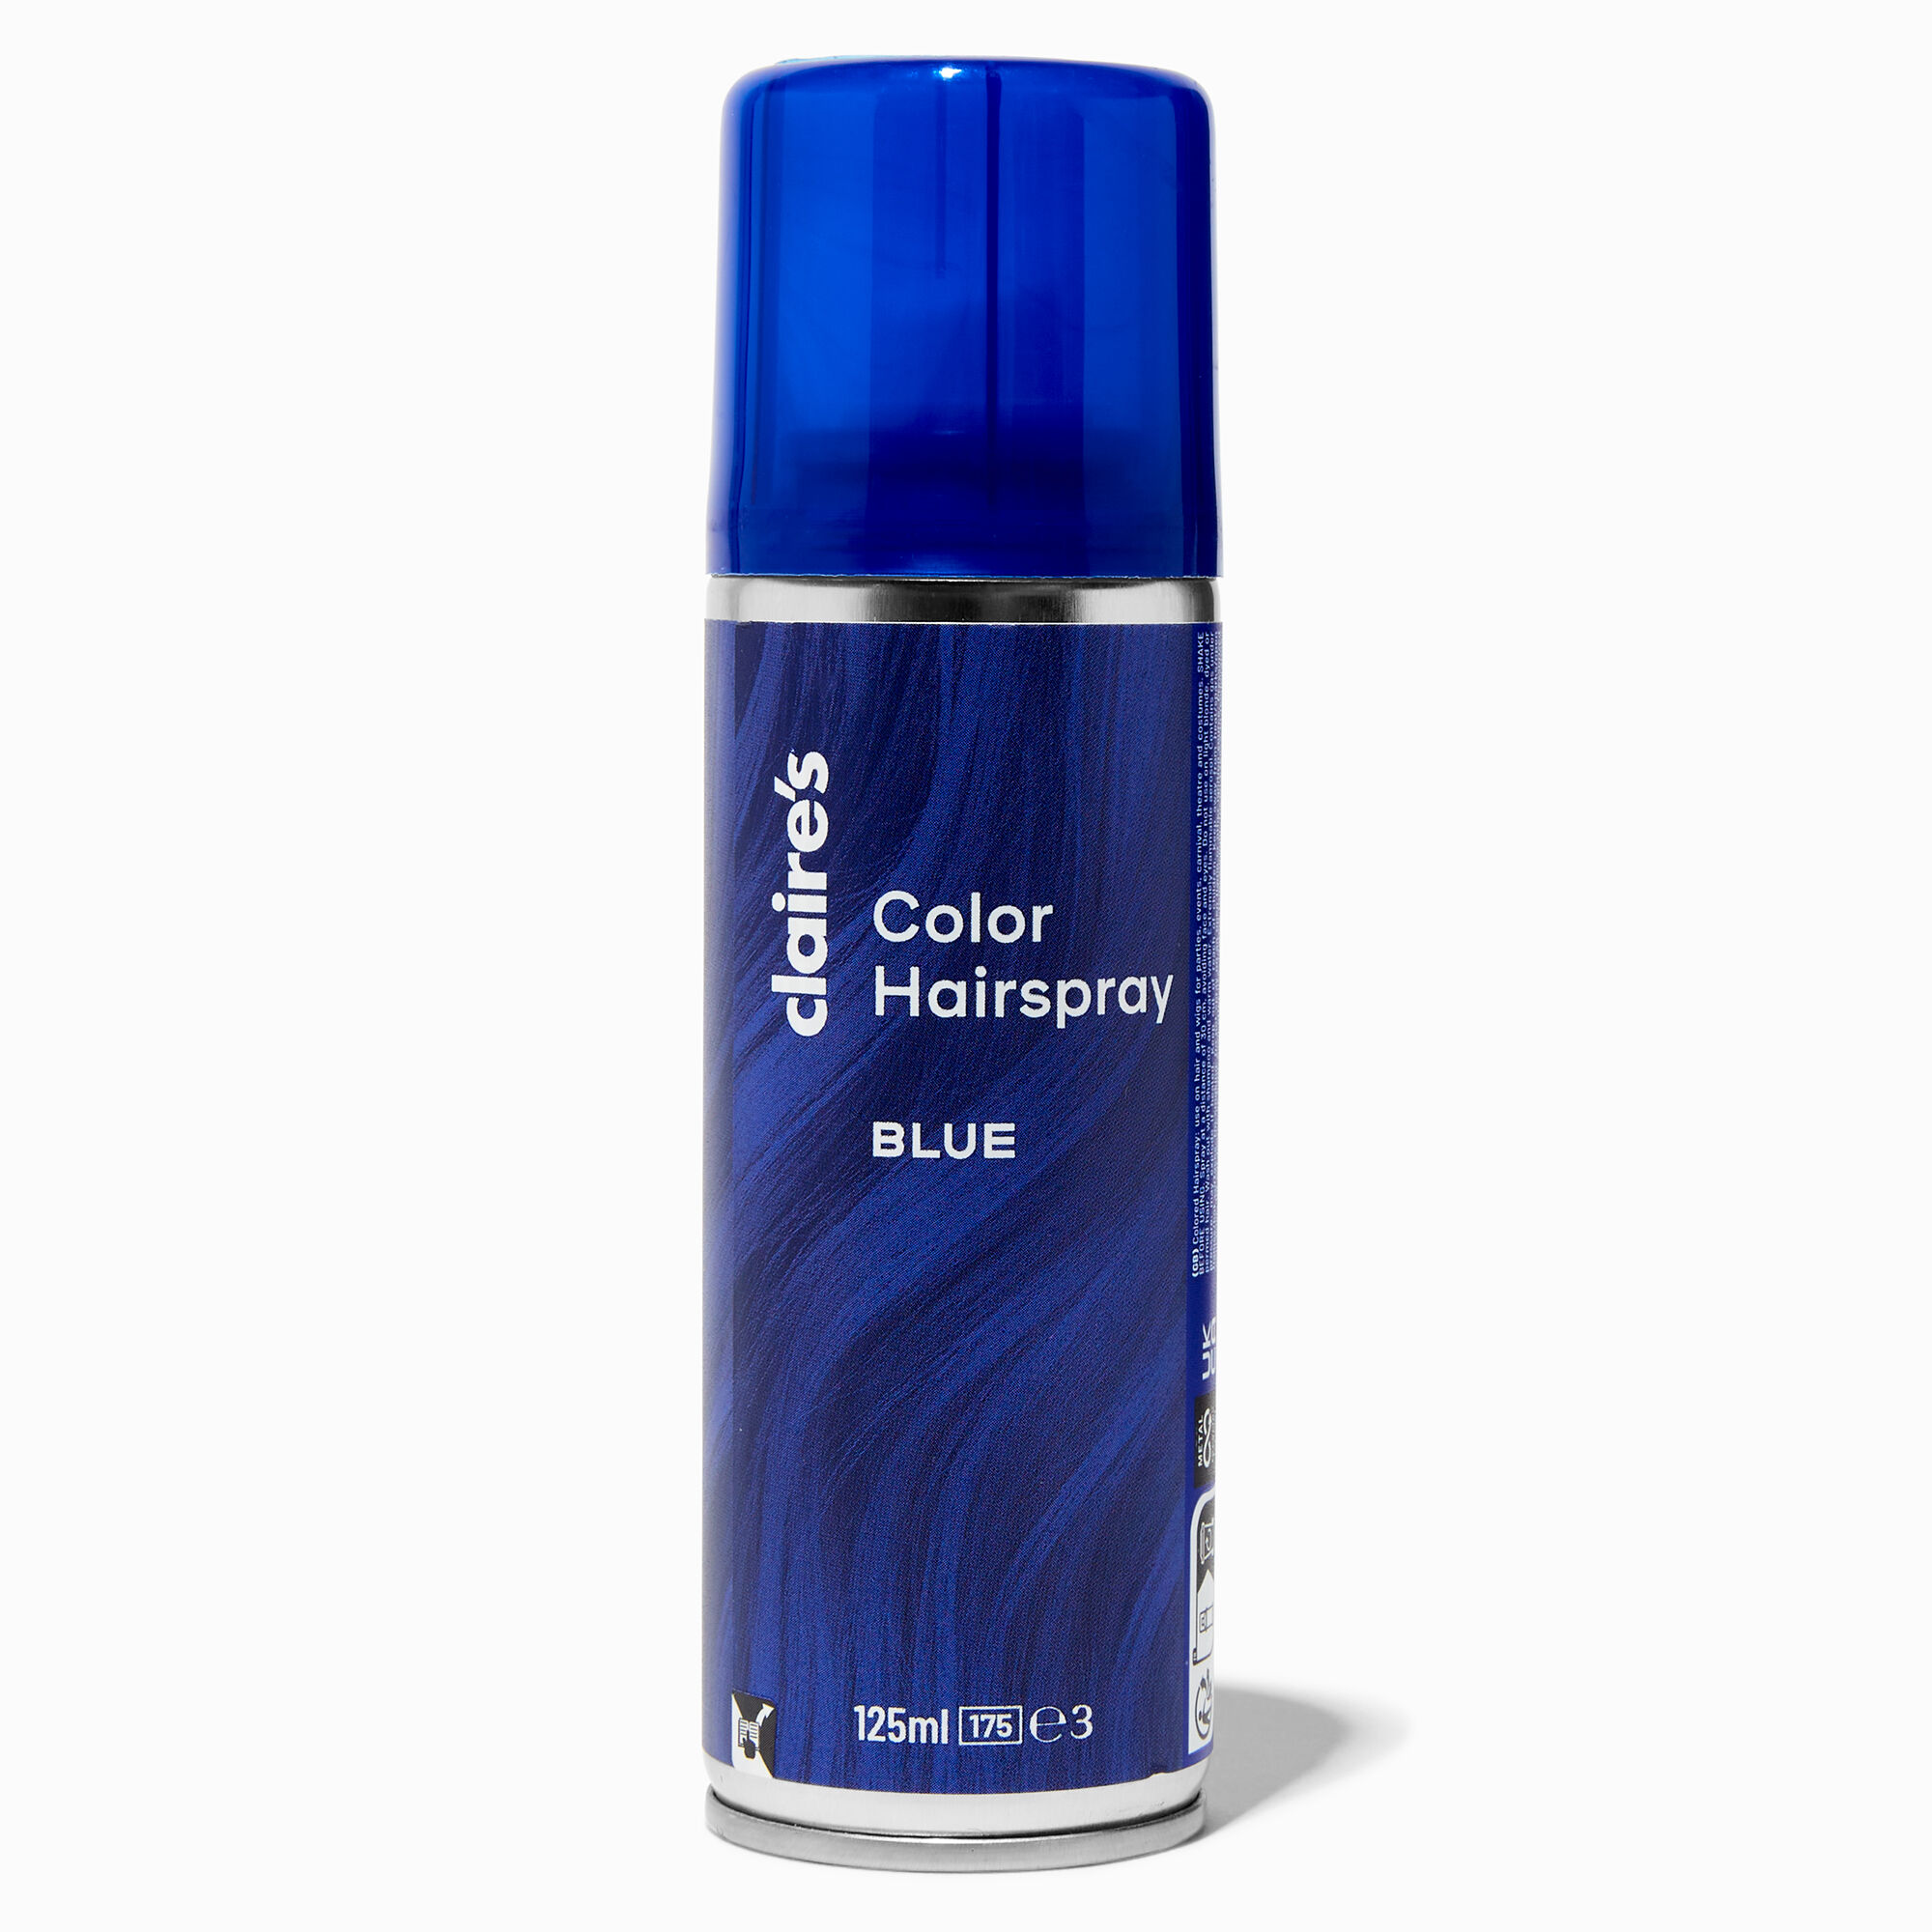 View Claires Colour Hairspray Blue information